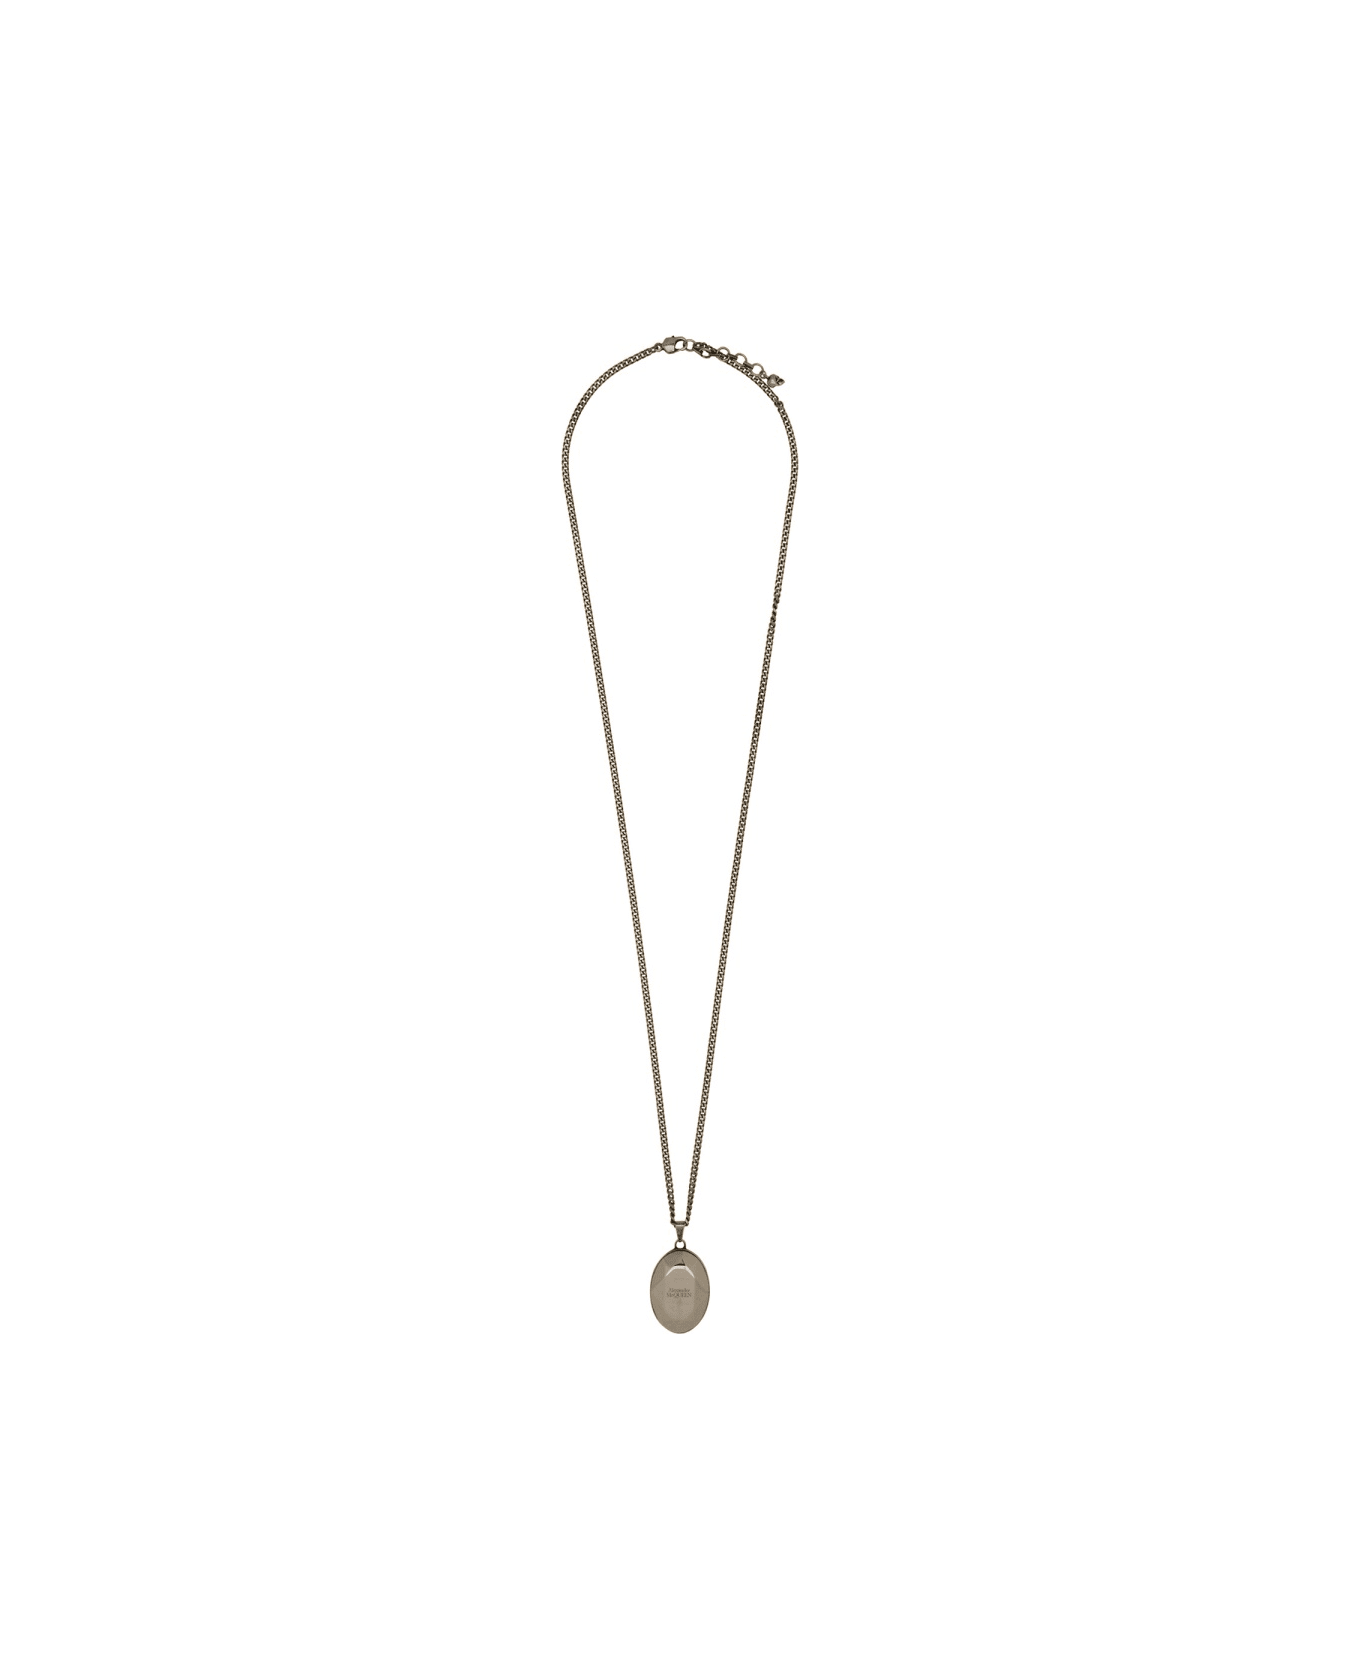 Alexander McQueen Faceted Stone Necklace - SILVER